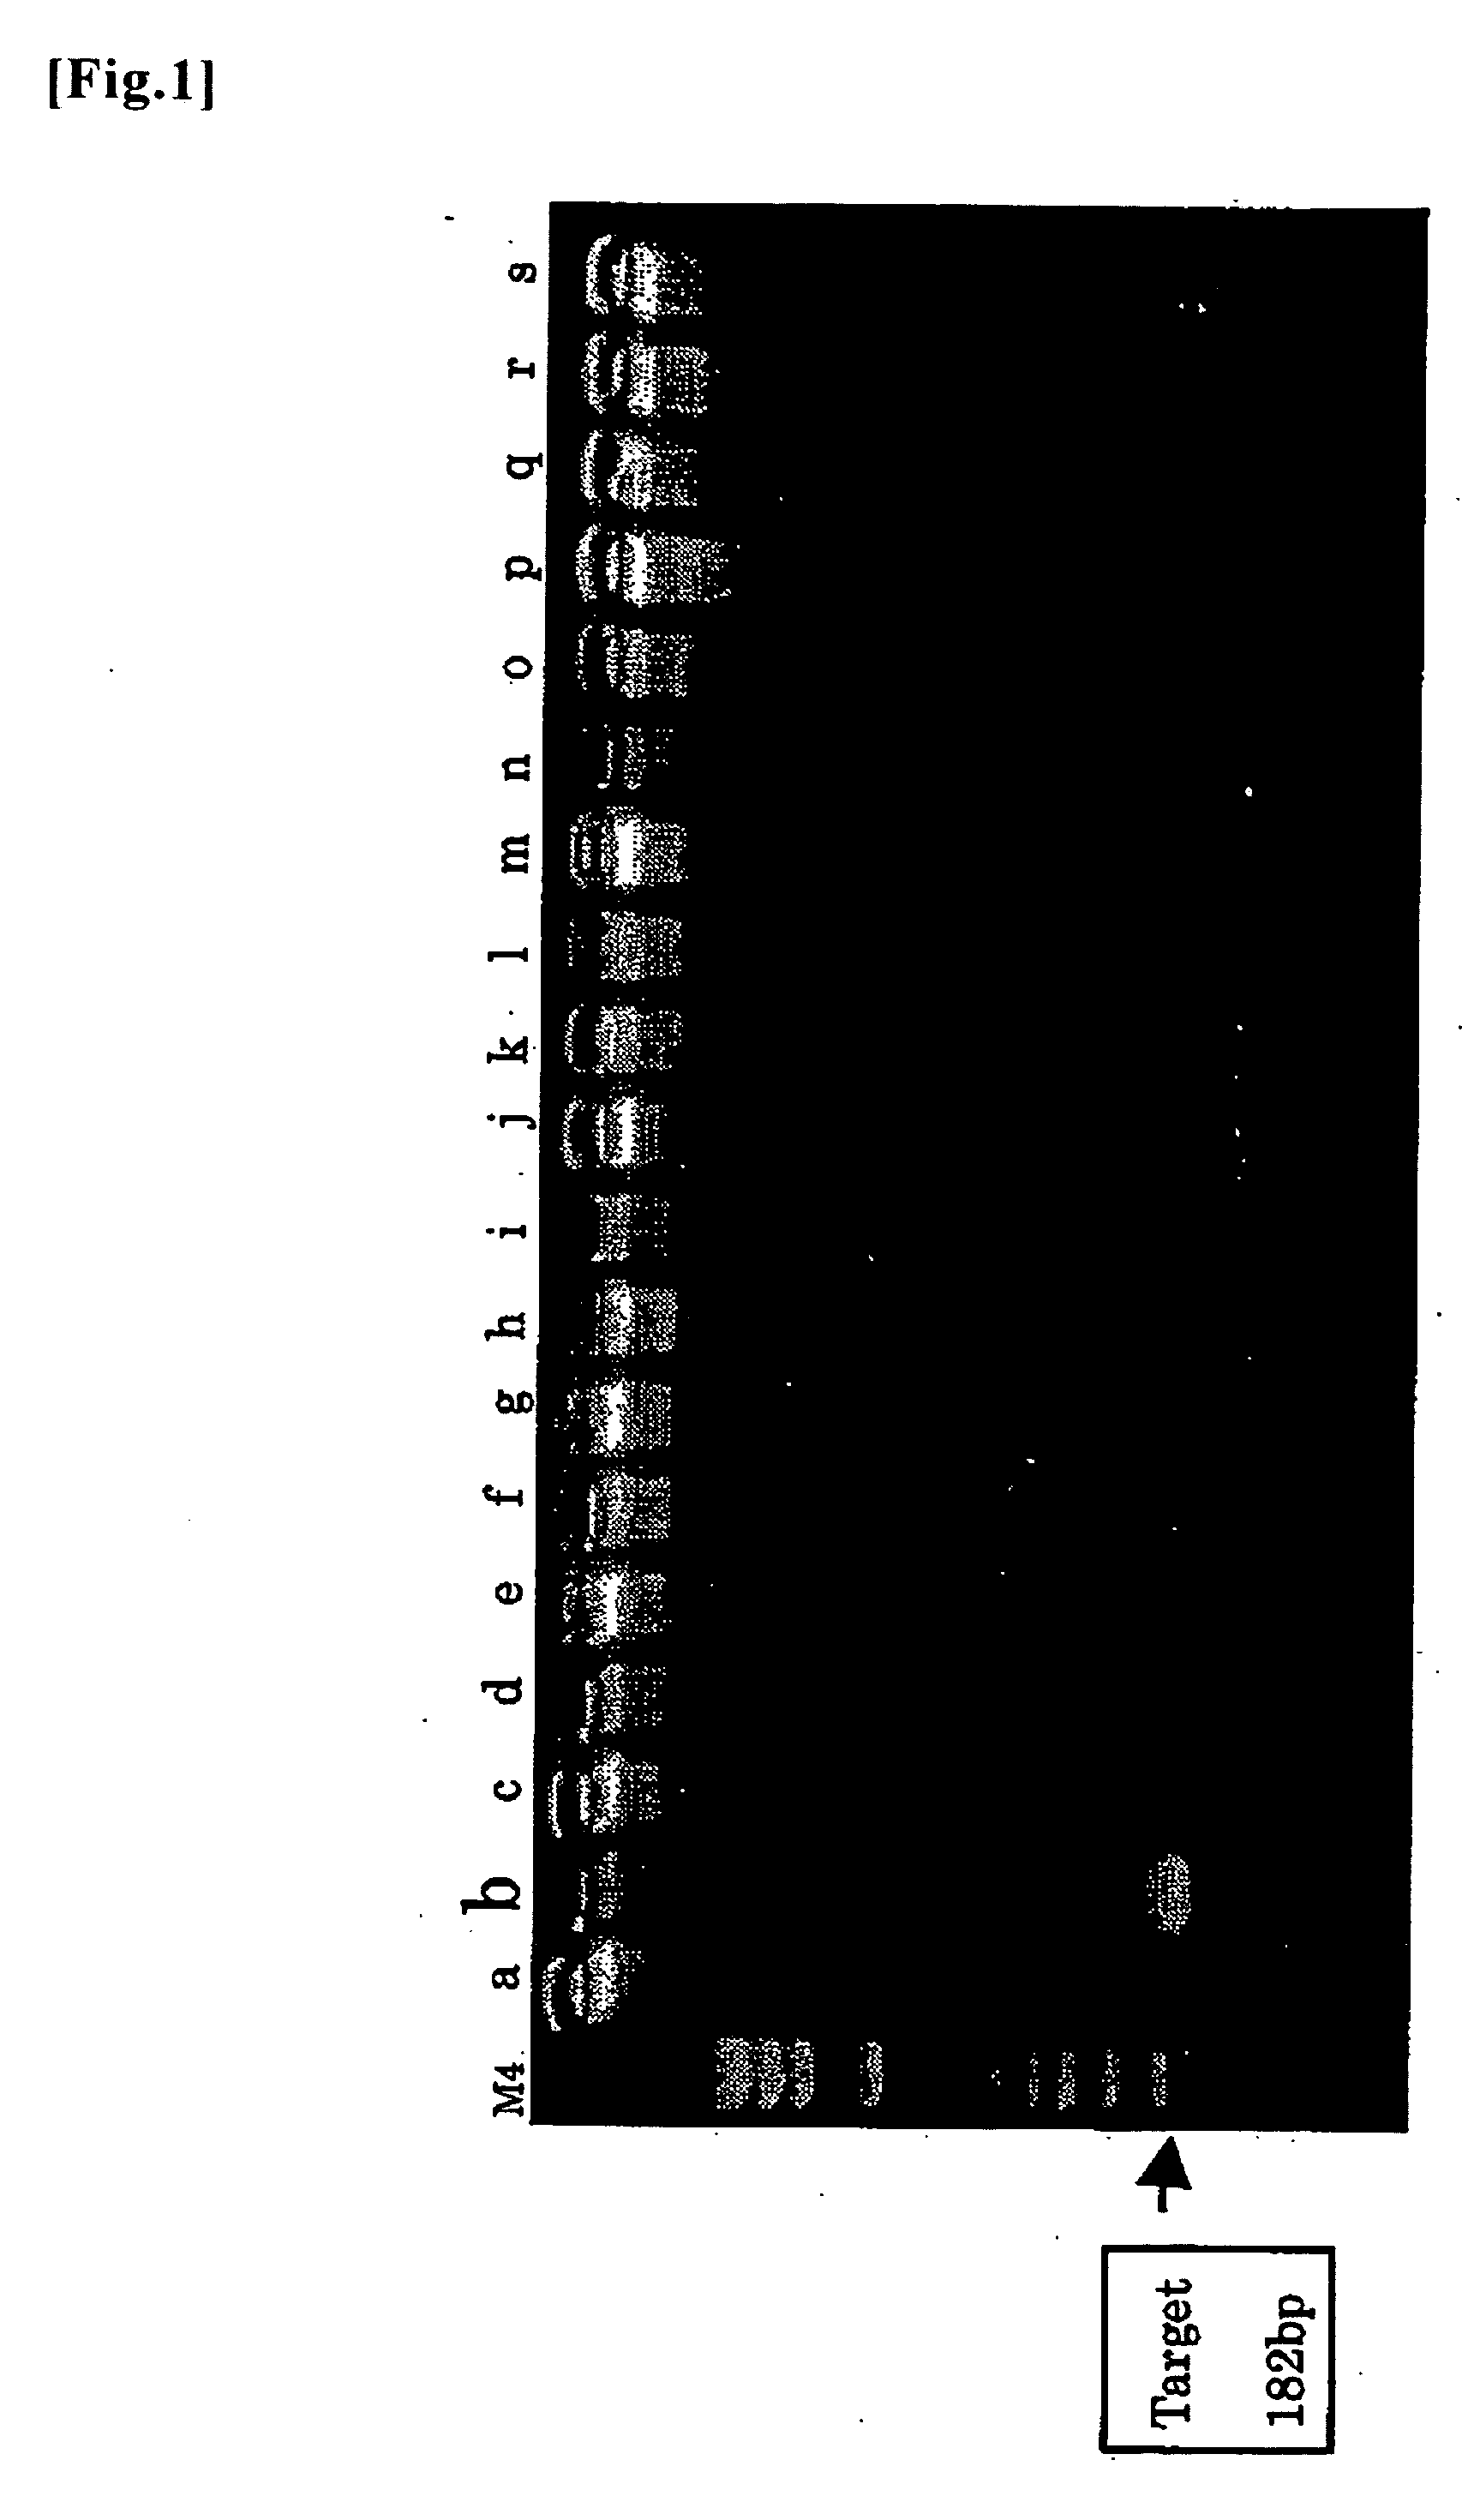 Probe And Primer For Tubercle Bacillus Detection, And Method Of Detecting Human Tubercle Bacillus Therewith